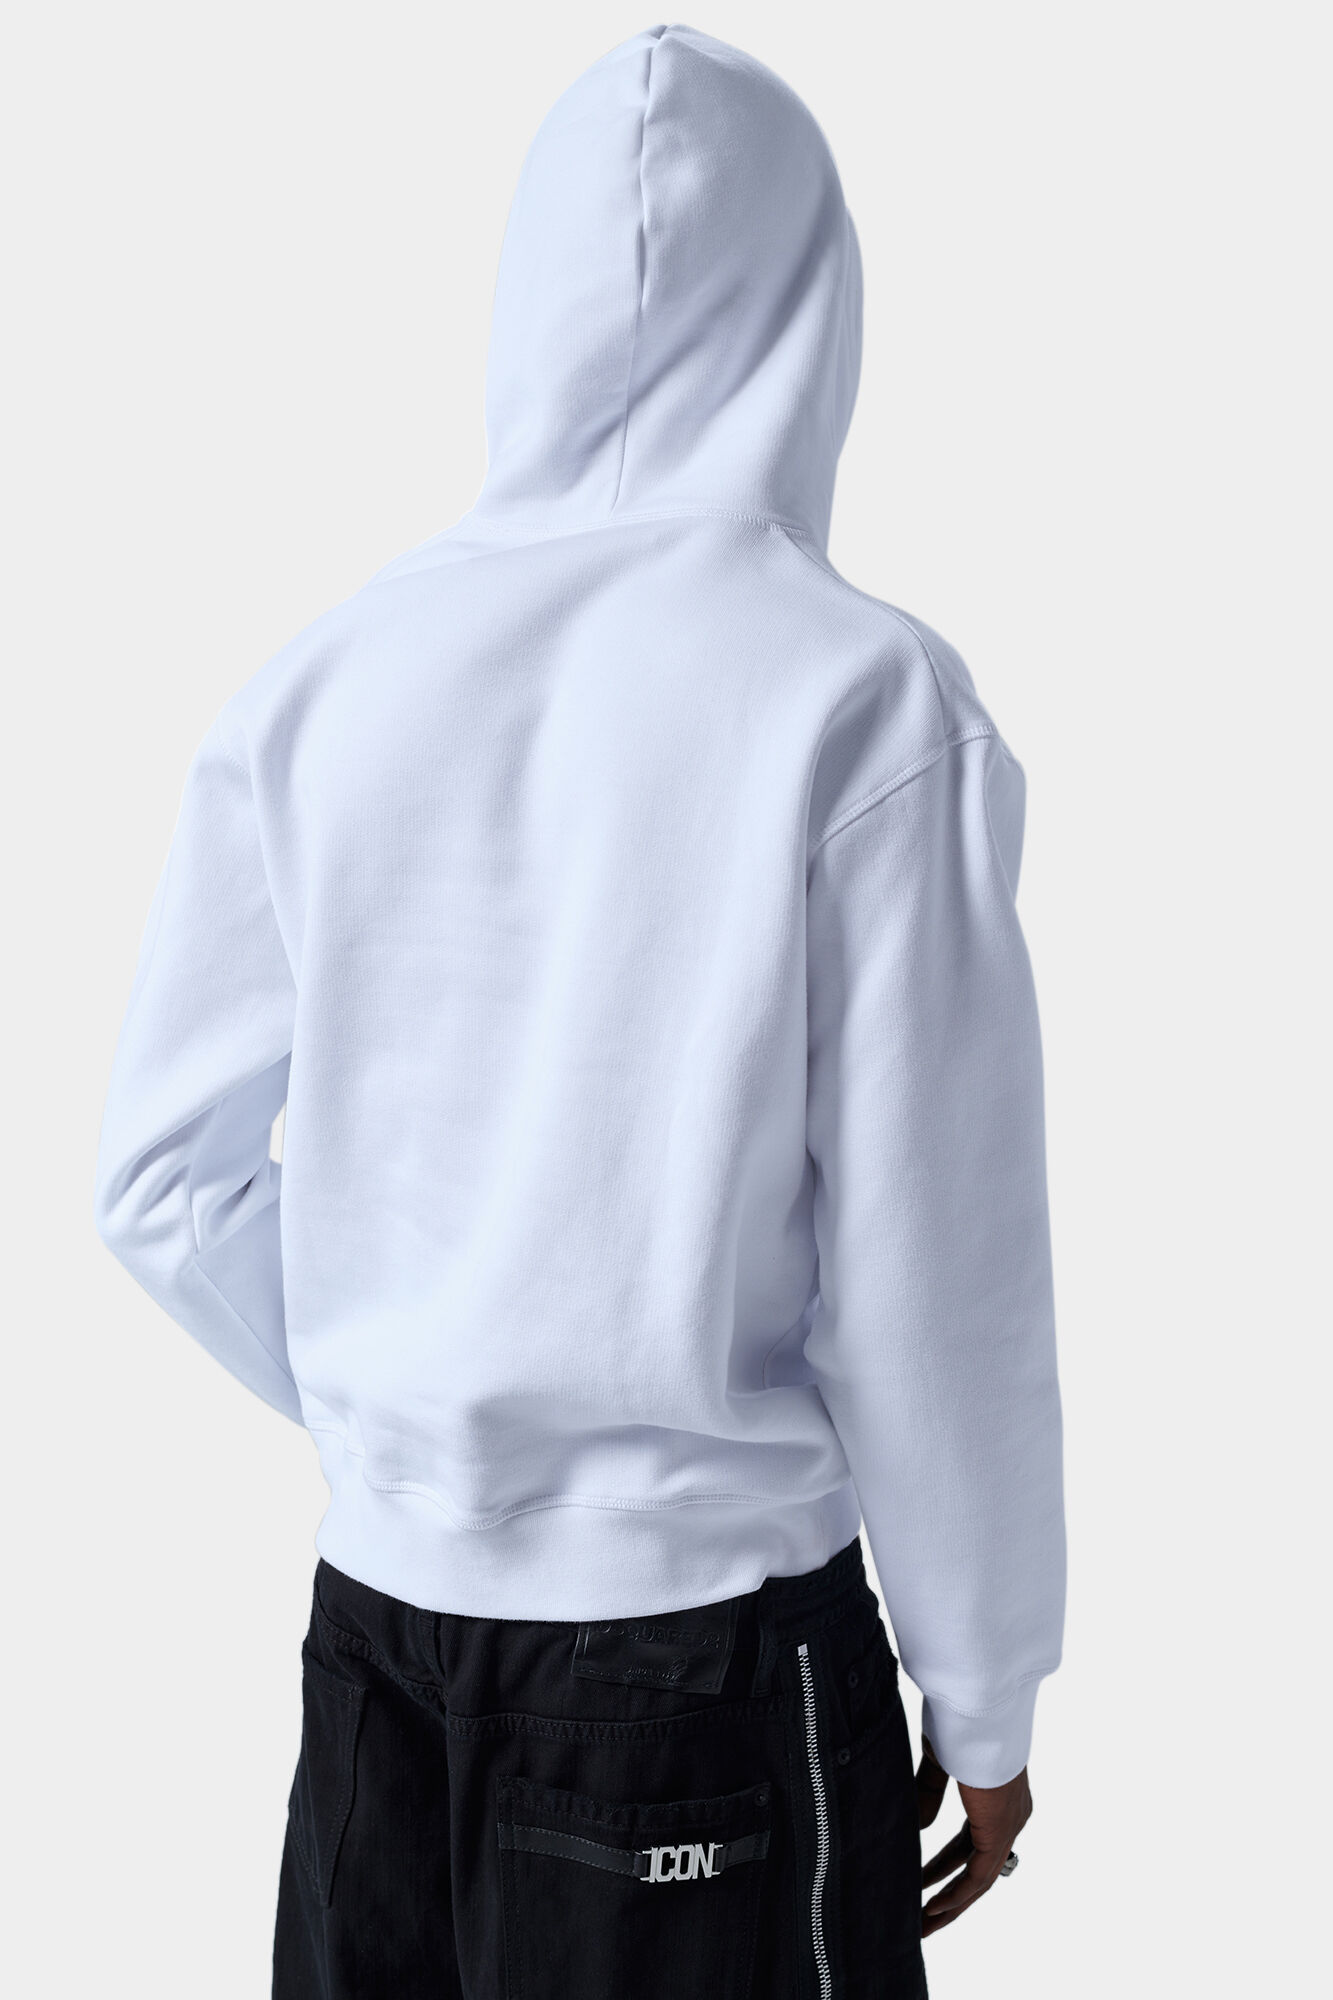 Be Icon Cool Hoodie